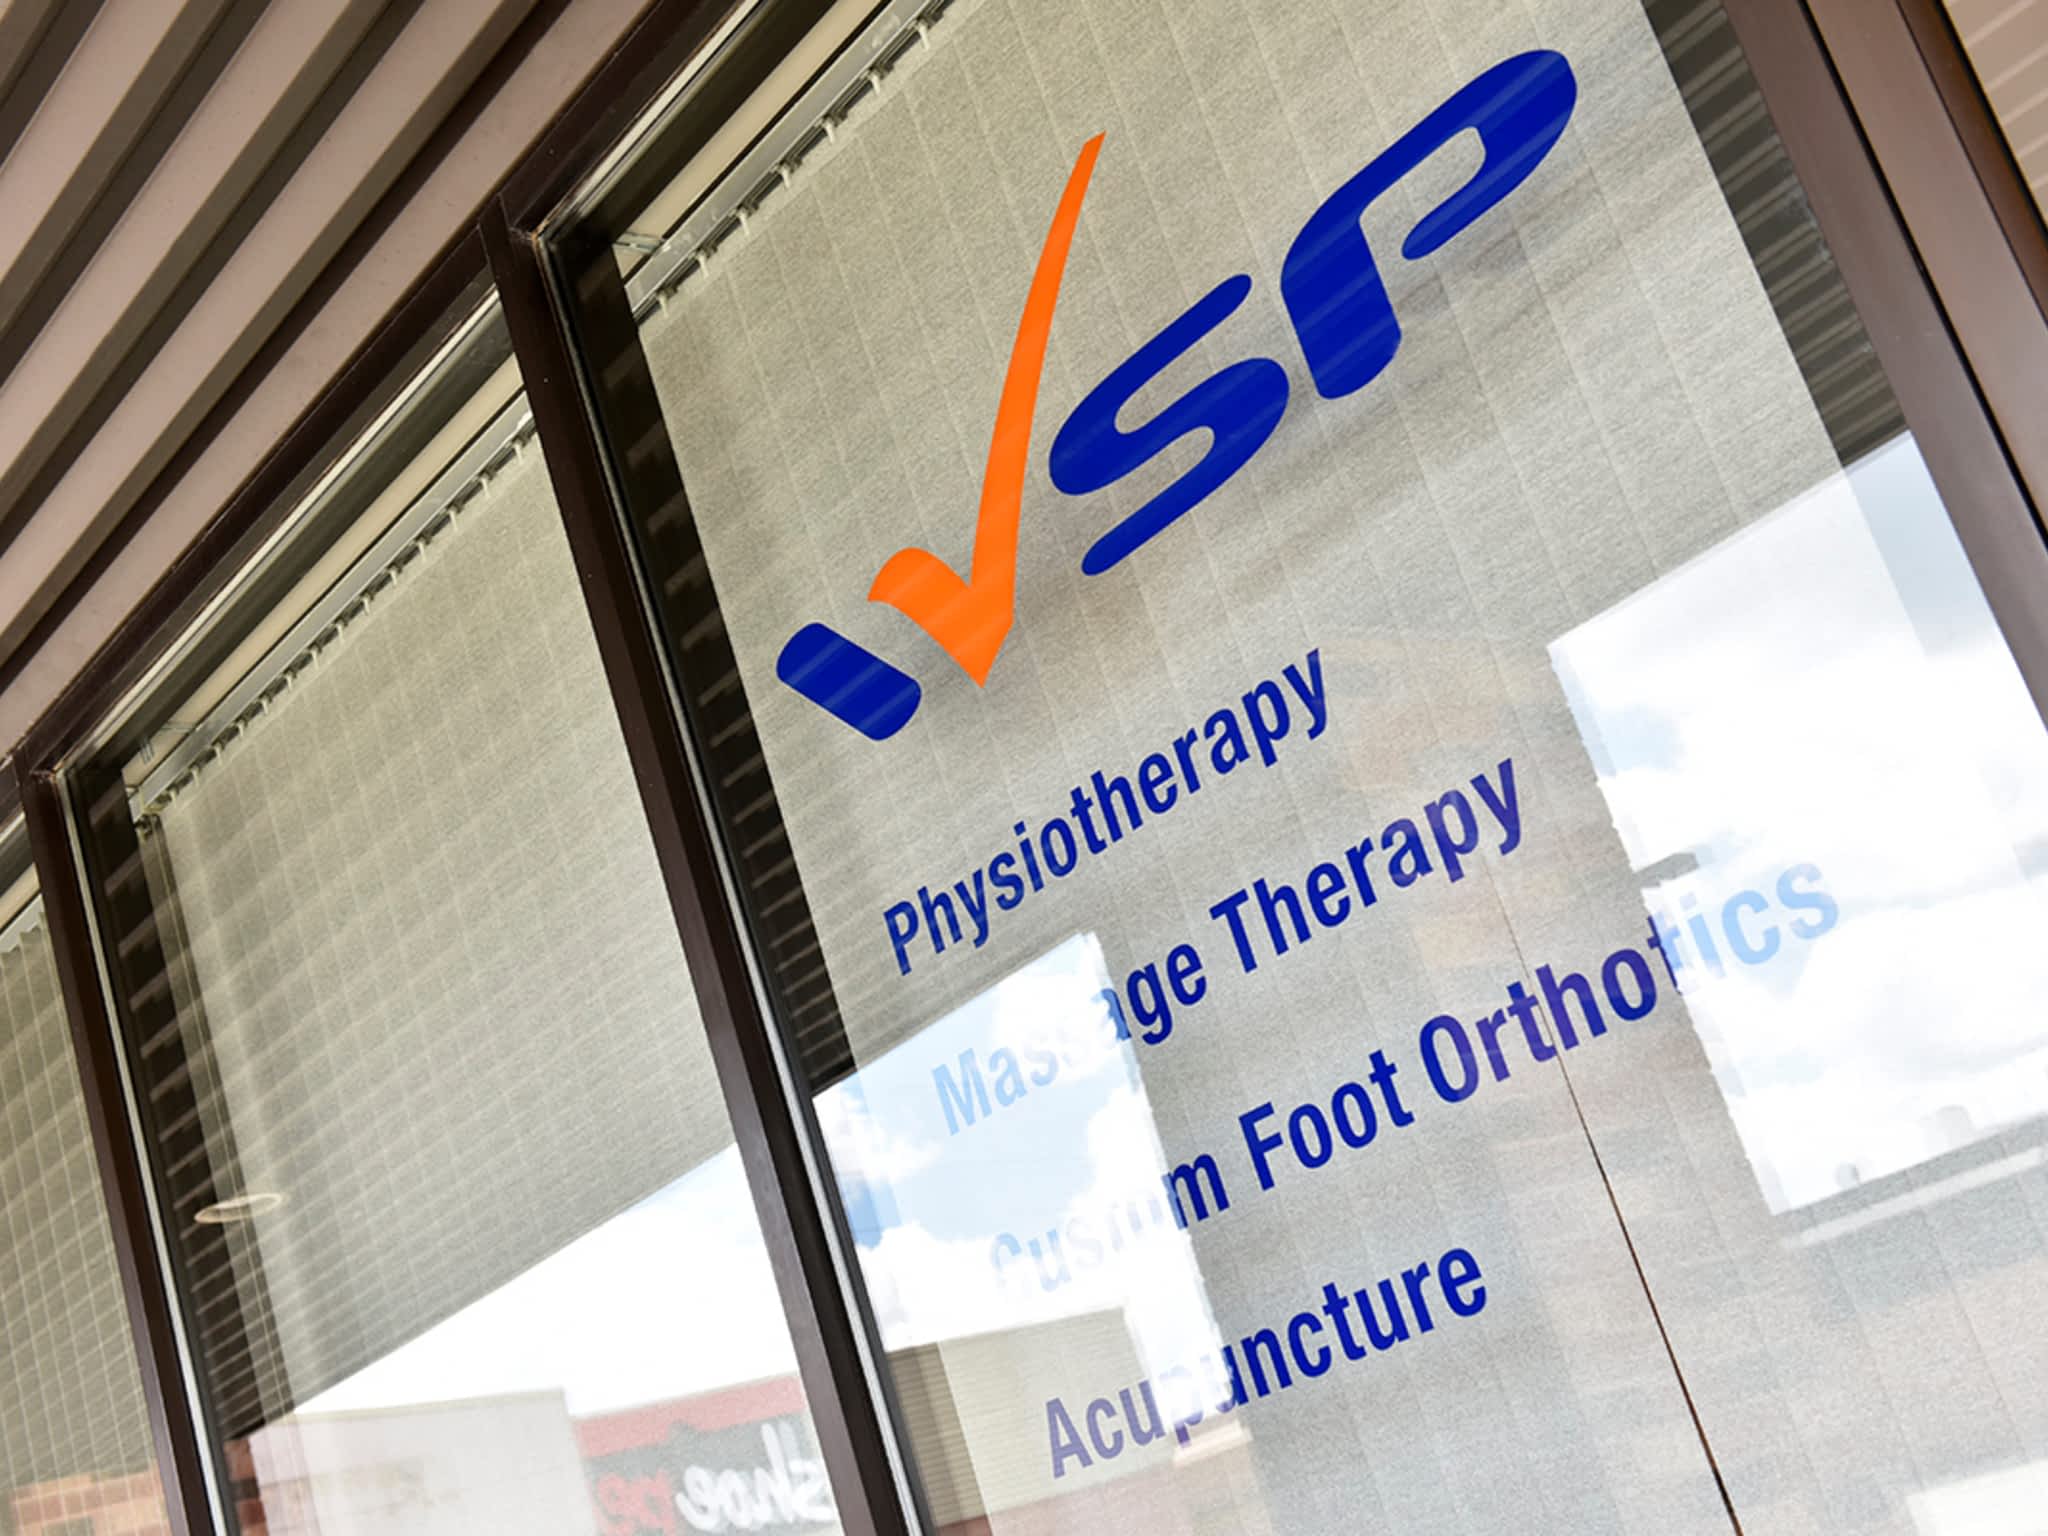 photo West Side Physiotherapy